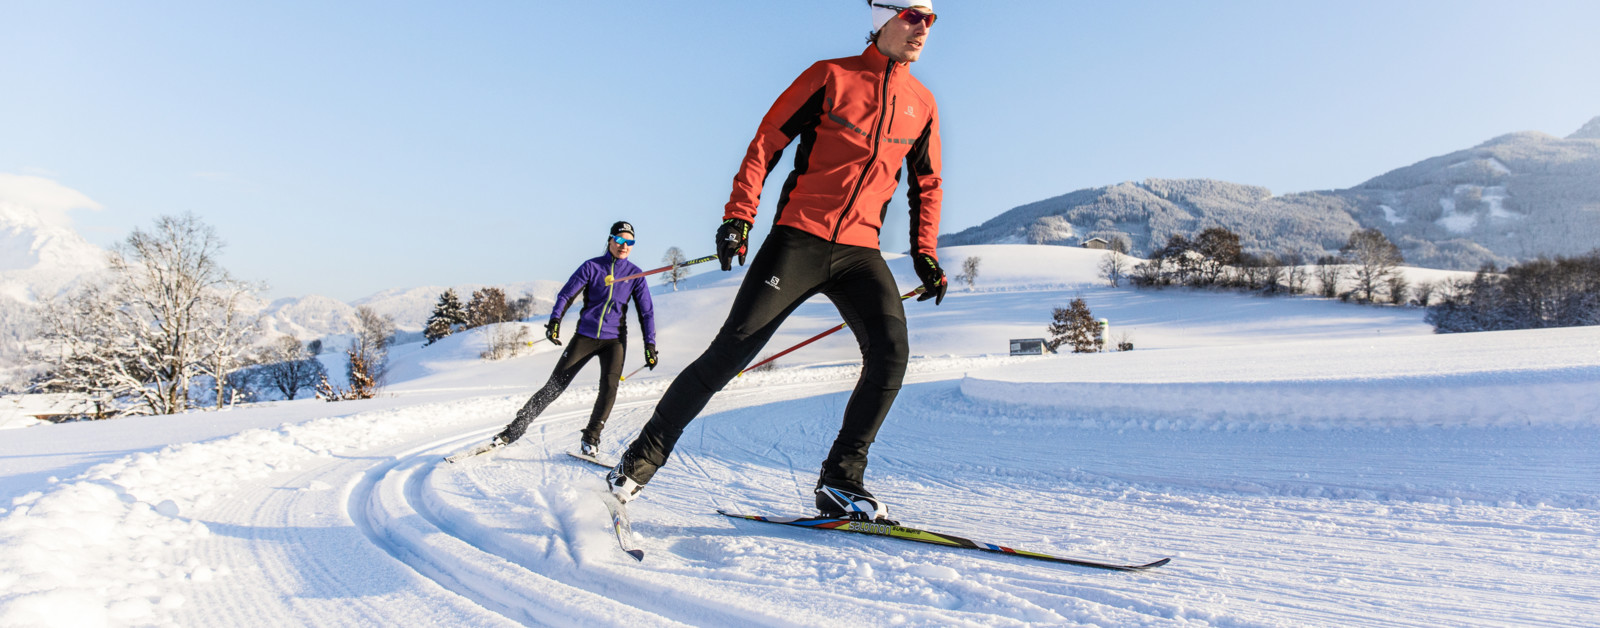 8 Best Cross-Country Ski Brands You Need to Know in 2023